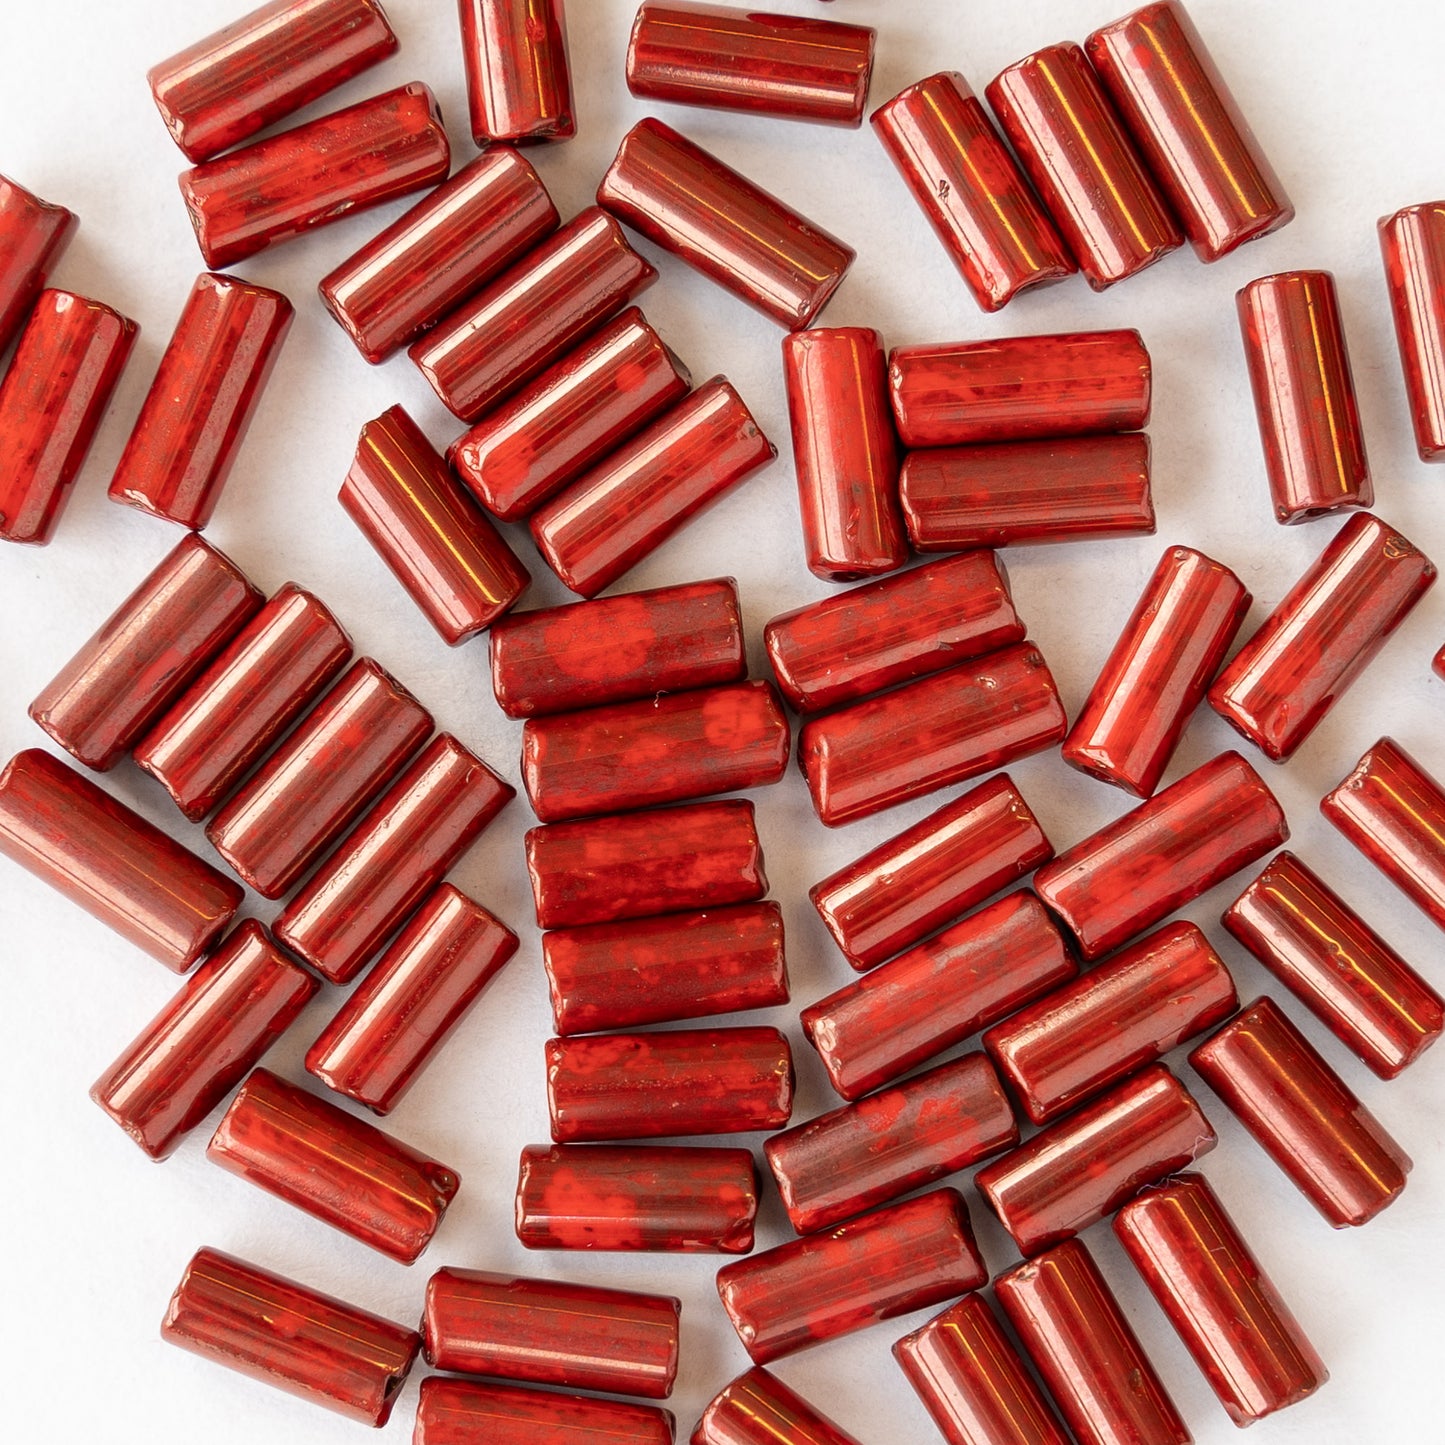 9x4mm Glass Tube Beads - Smokey Red - 20 or 60 Inches